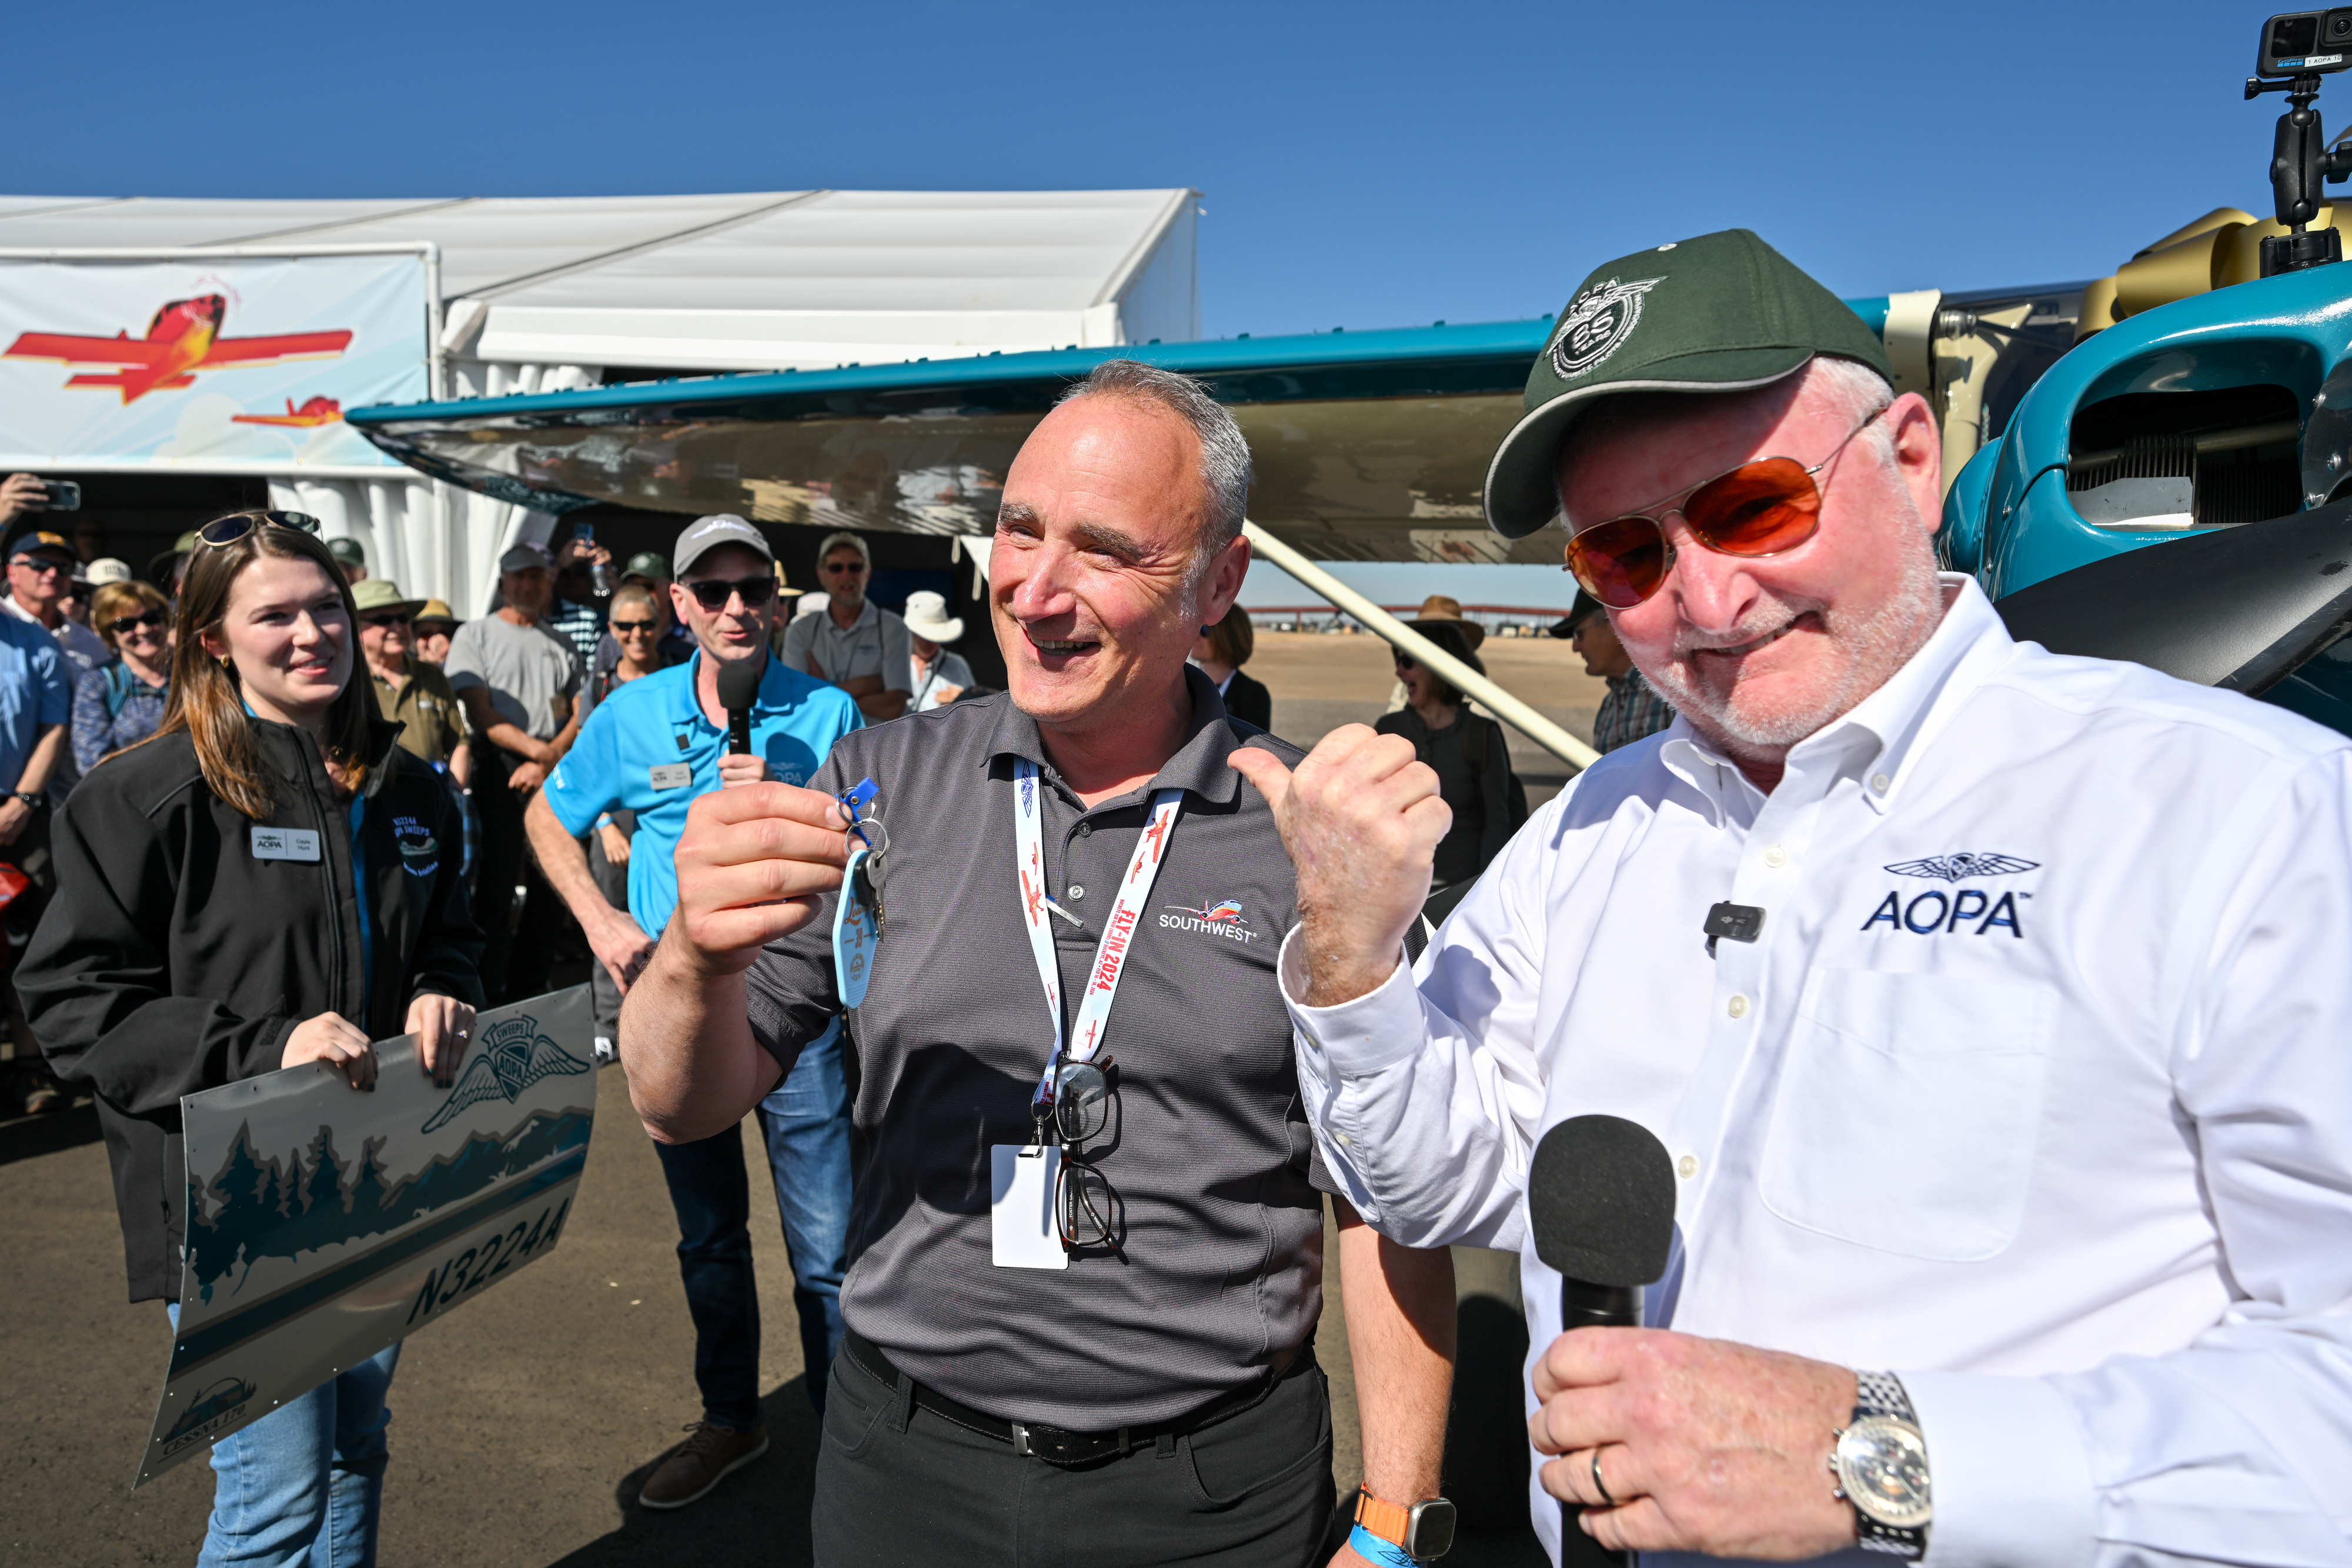 Cliff Gurske was handed the keys to the AOPA Sweepstakes Cessna 170B during the Buckeye Air Fair in Buckeye, Arizona. Photo by David Tulis.